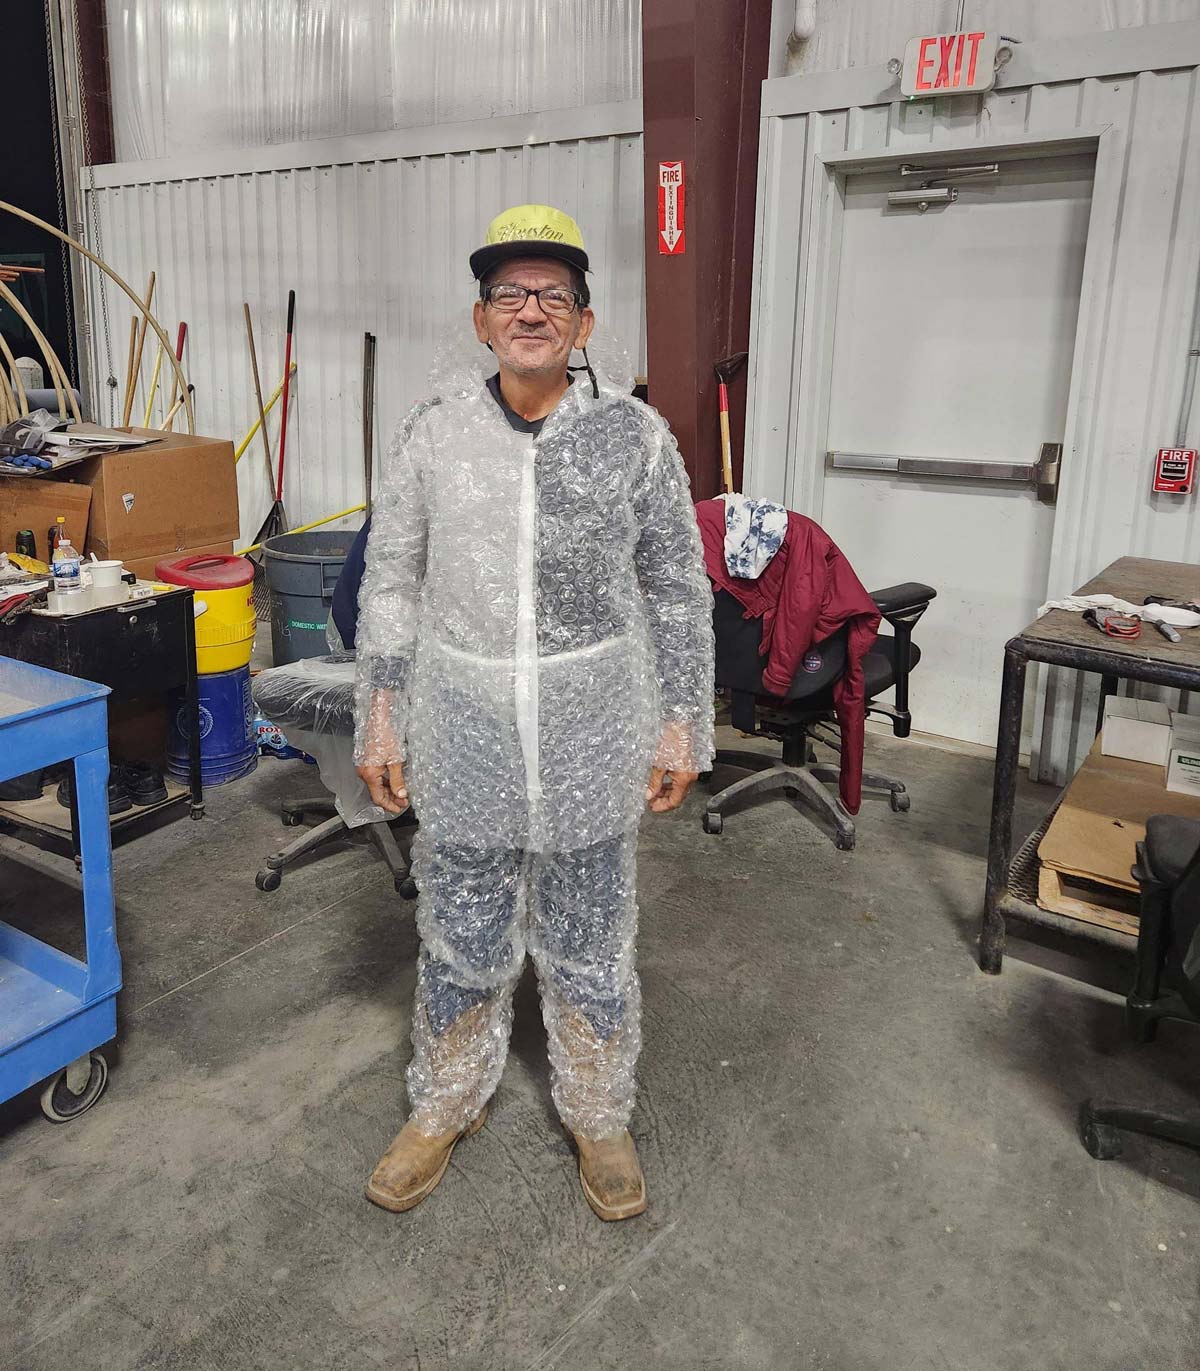 After getting hit by a forklift twice in one week, my coworker started wearing protection